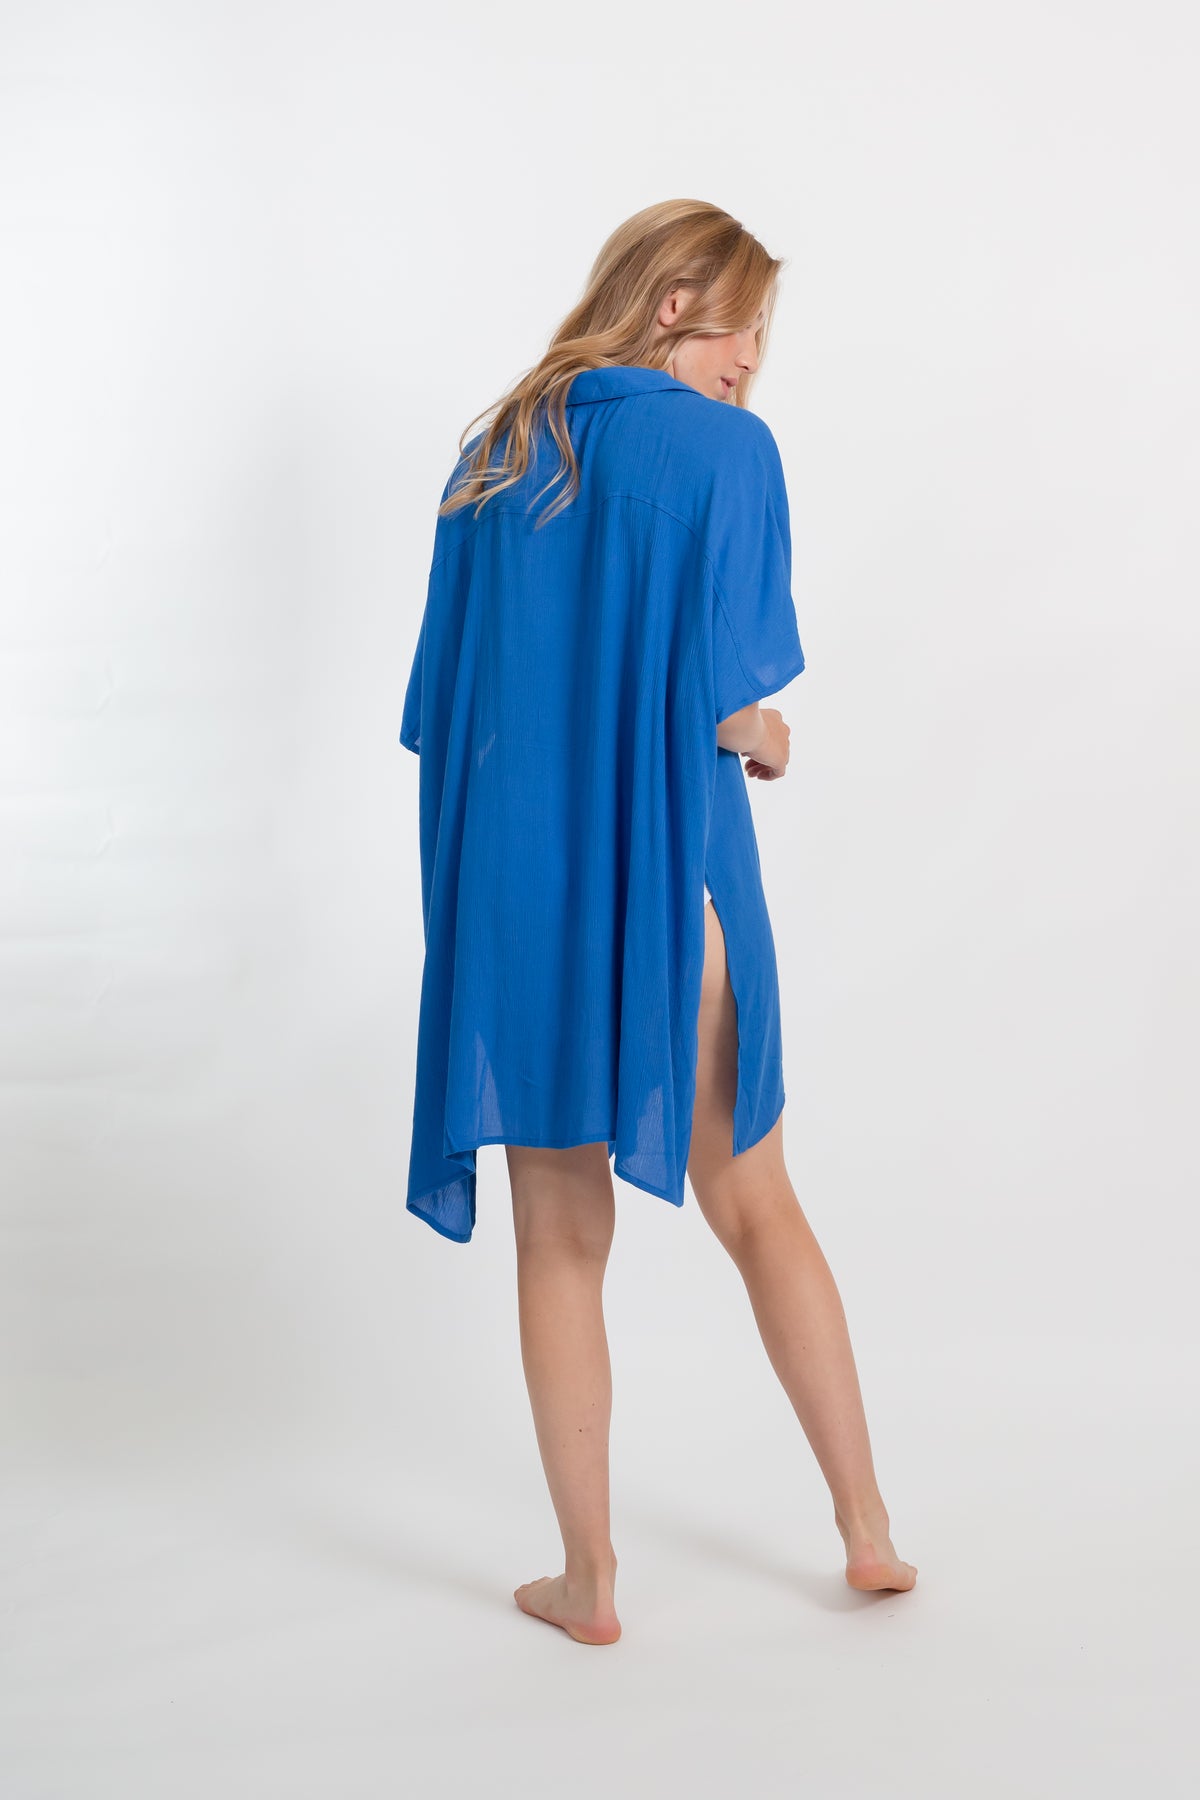 A blonde Caucasian model wearing a blue big shirt bathing suit cover up shirt dress, standing in a studio smiling and showing the back of the mini dress. 